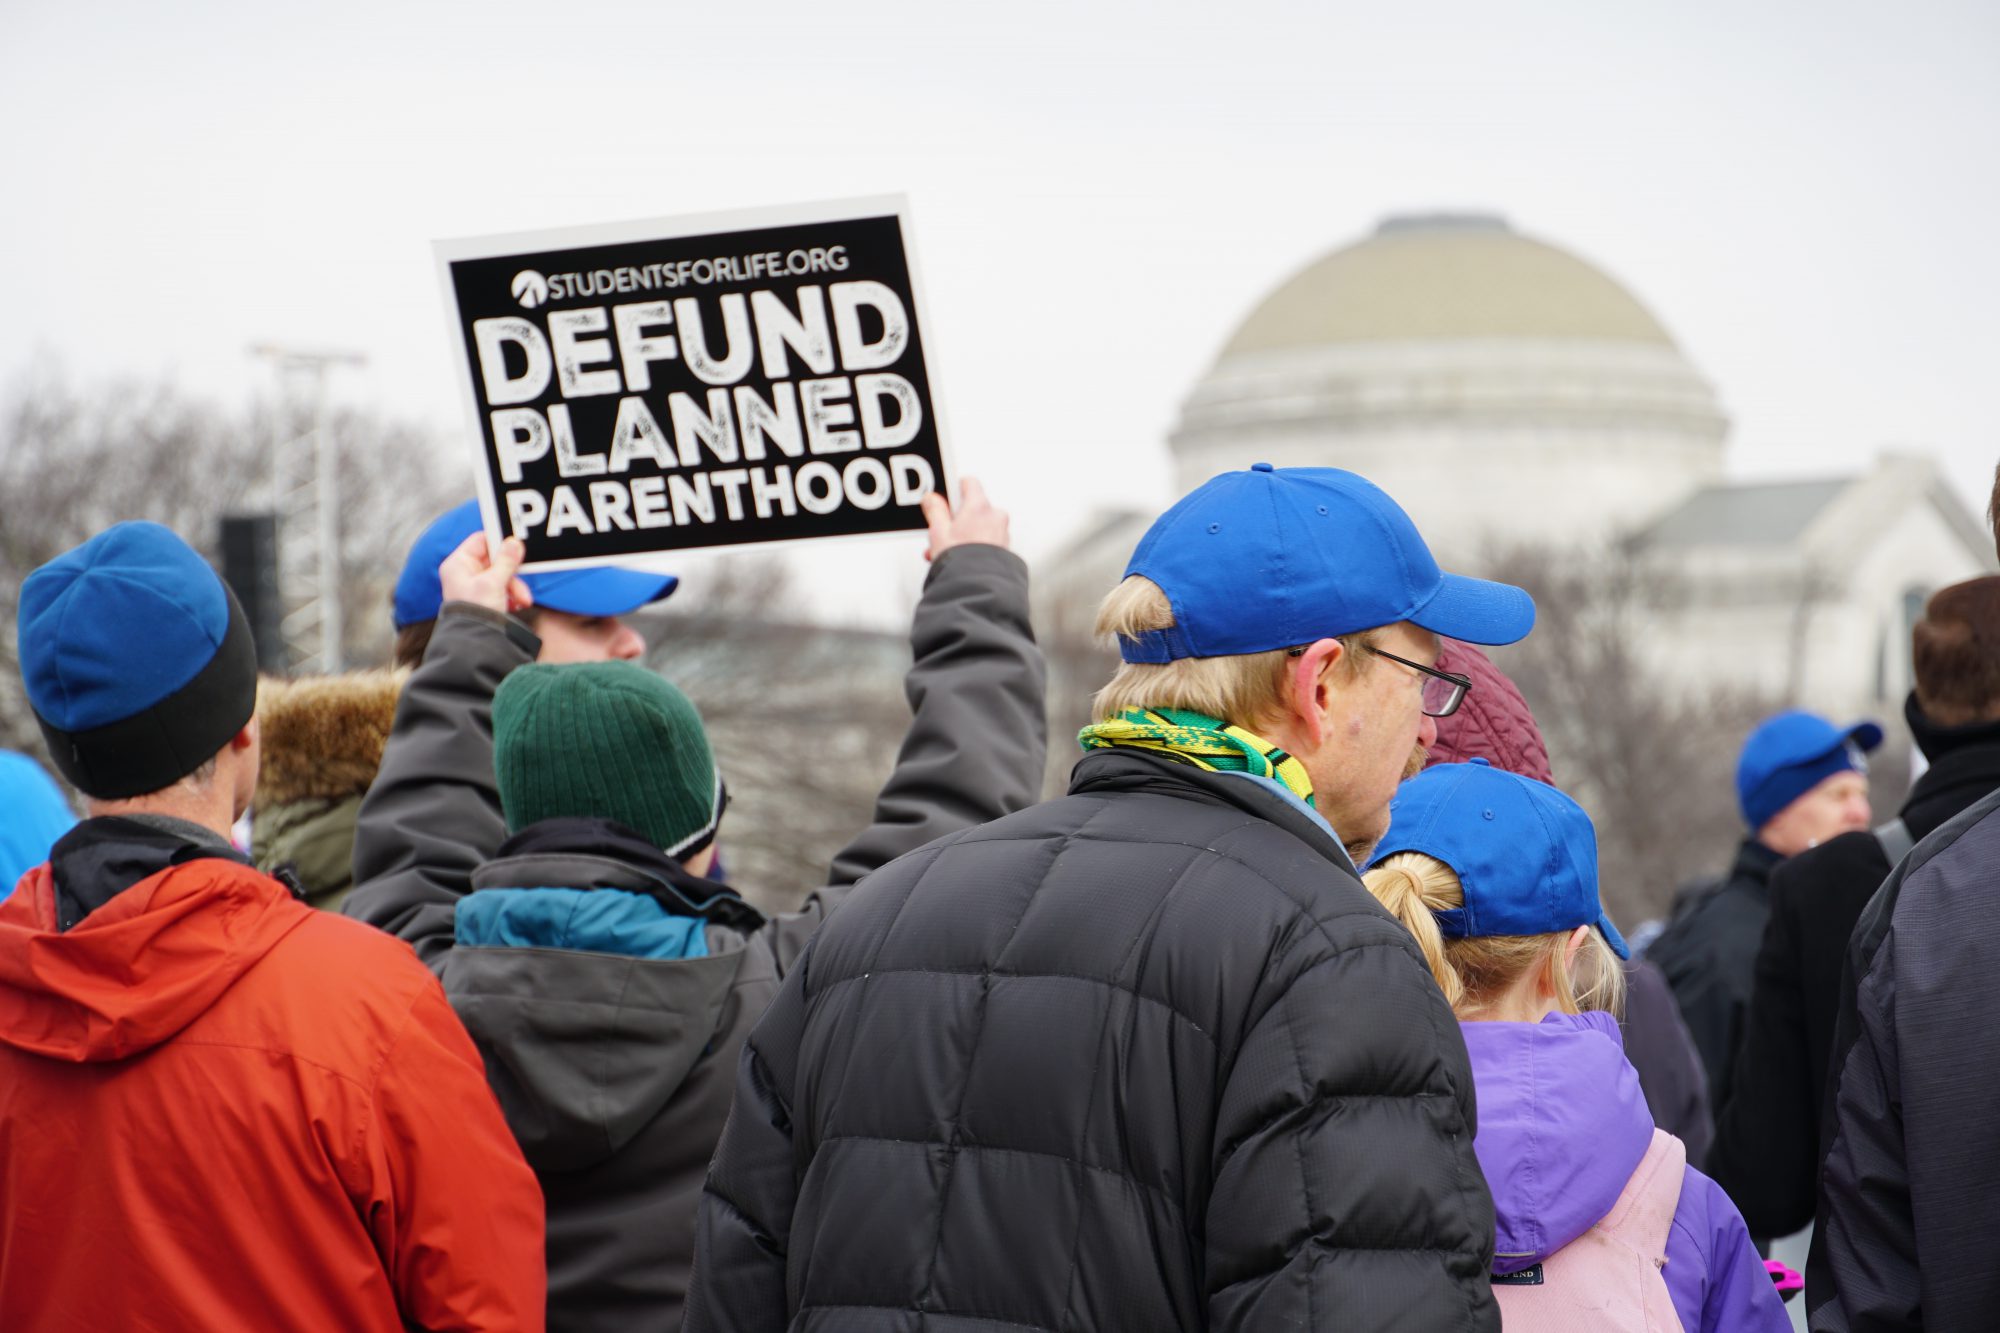 One of the marchers' goals is to defund Planned Parenthood. (Ester Wells/MNS)